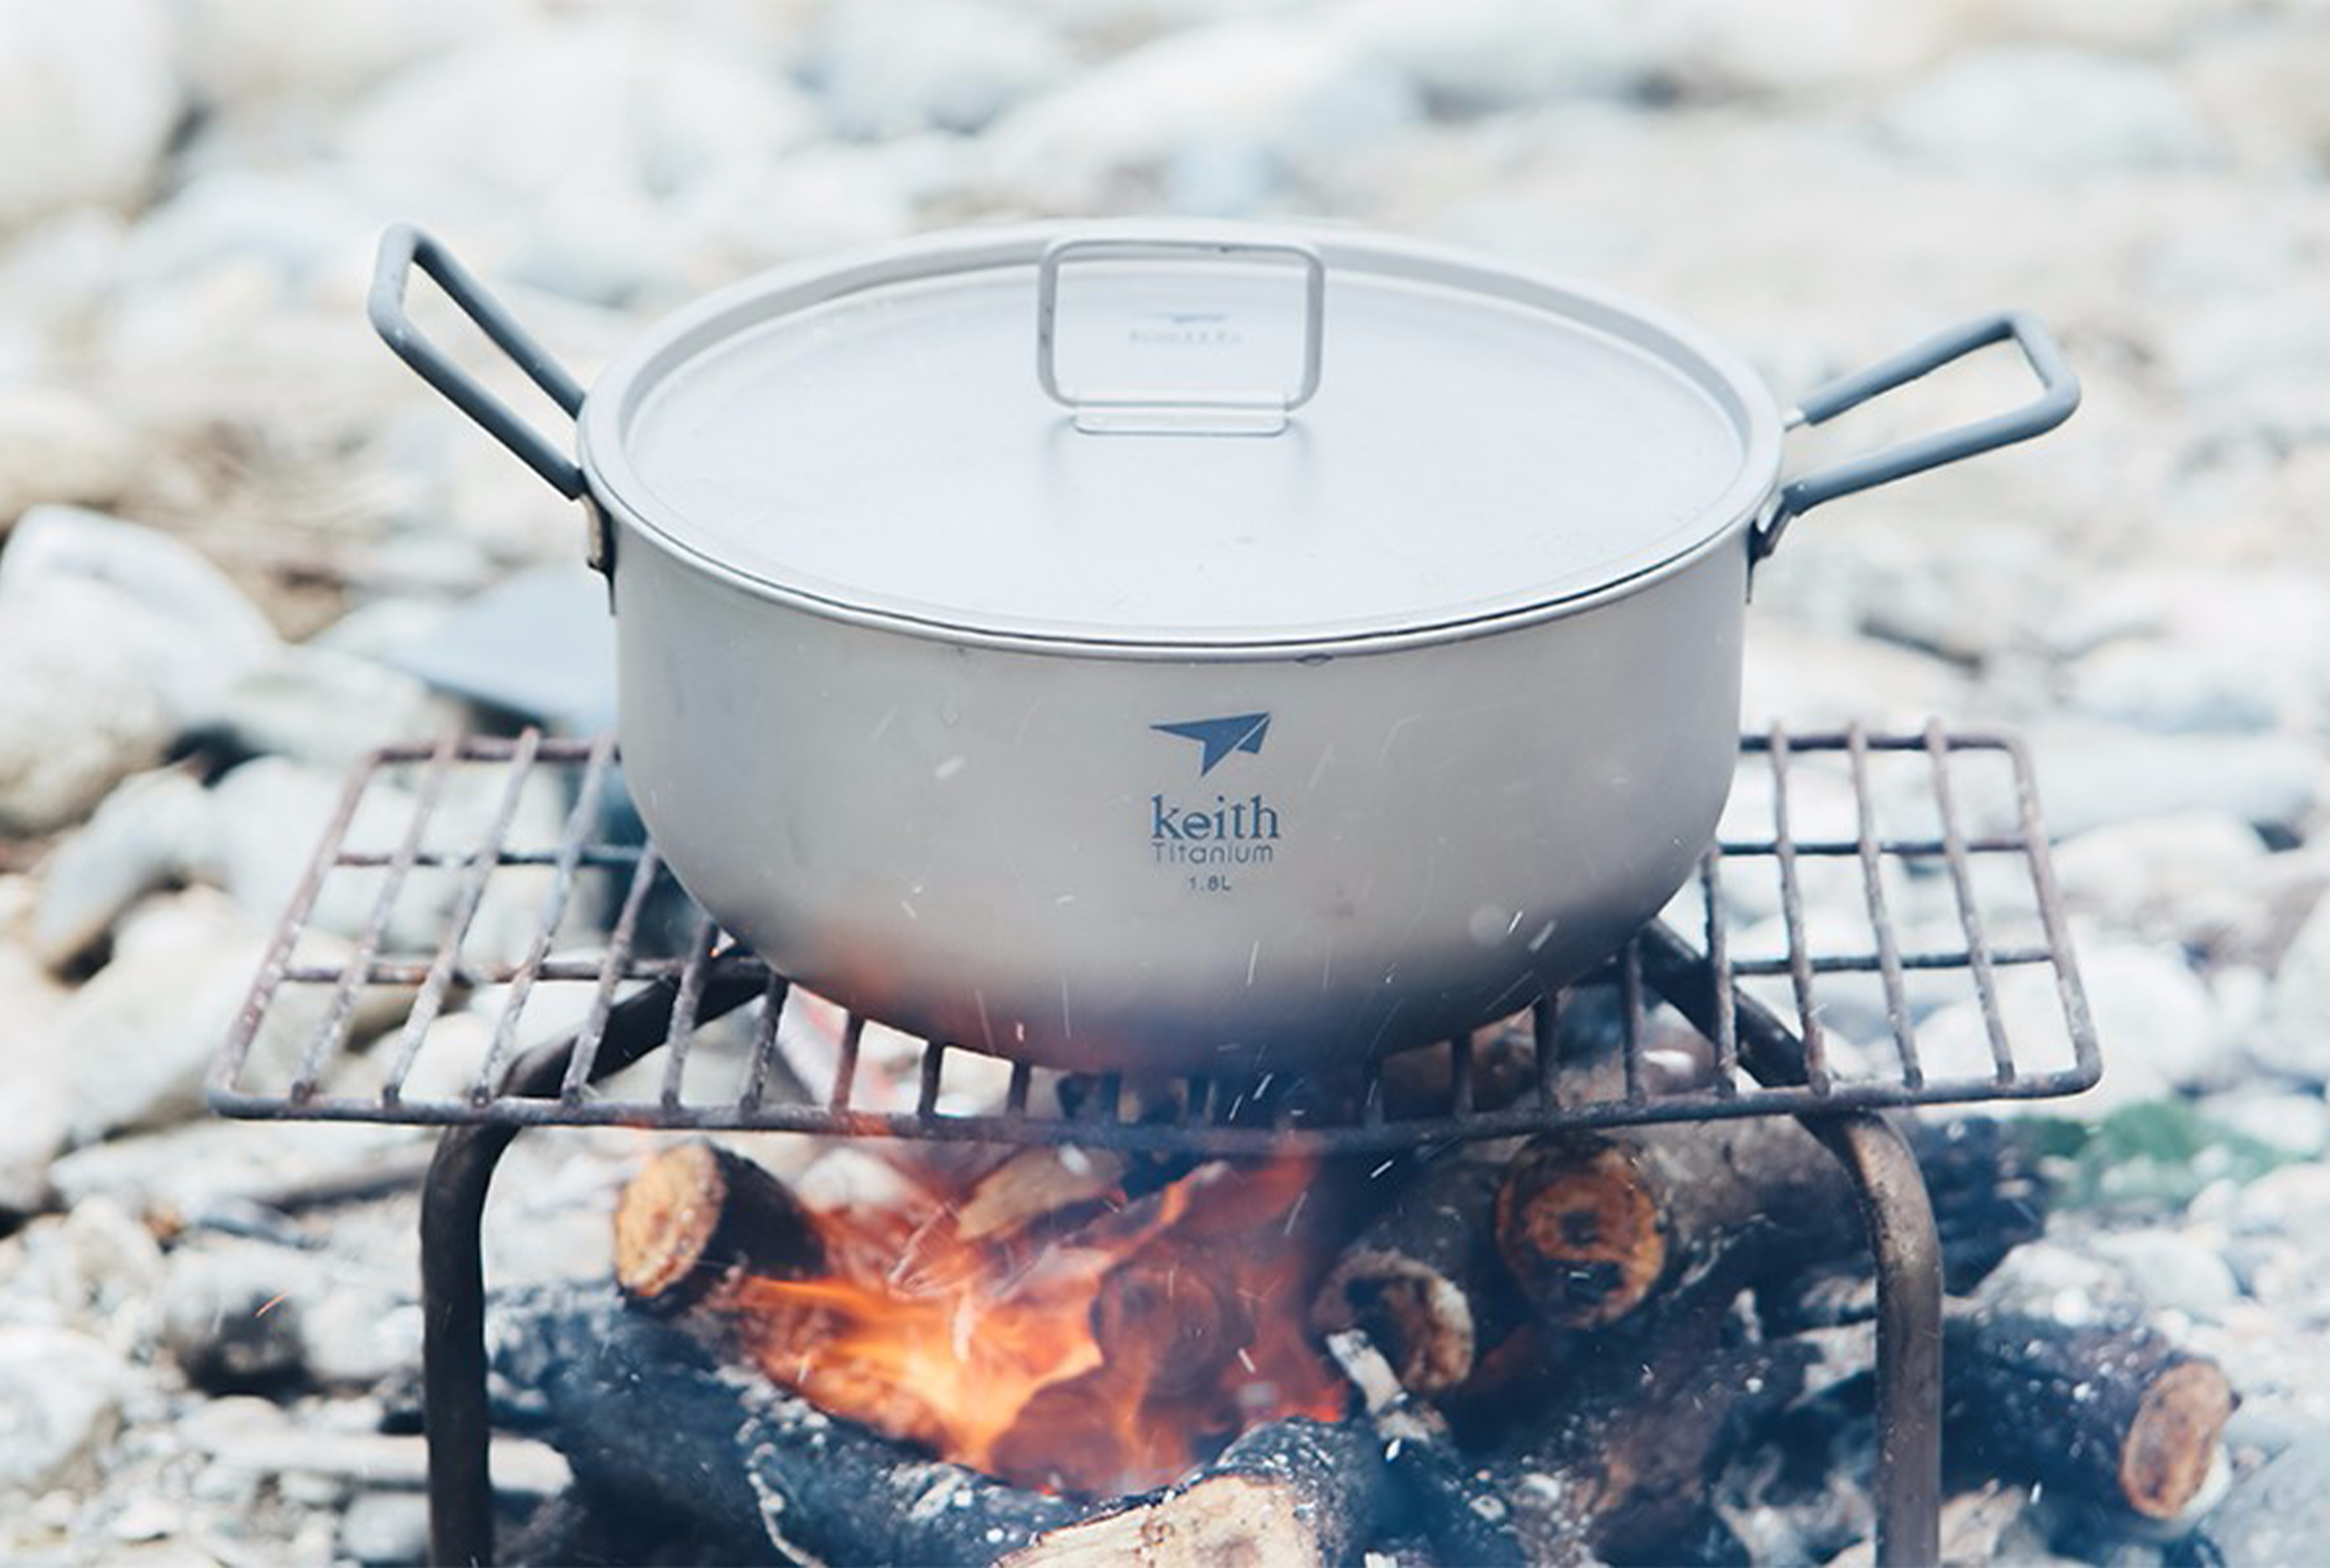 Keith Titanium innovations for outdoor cooking